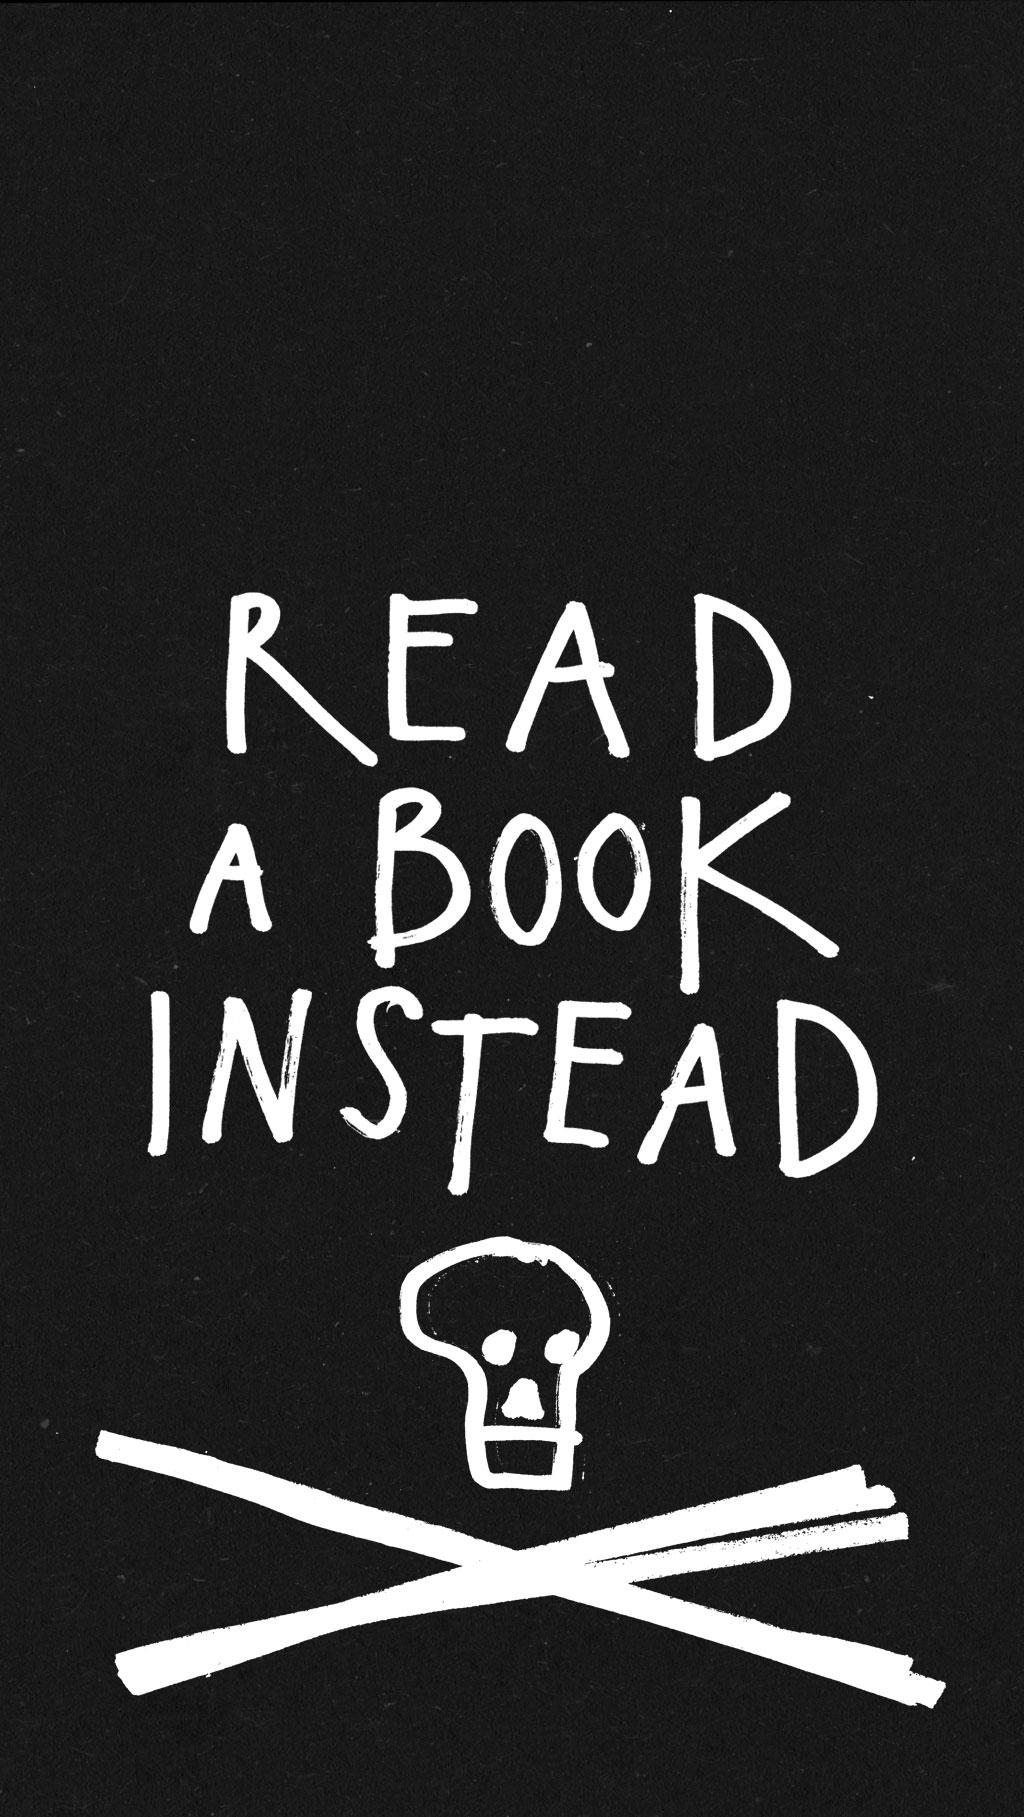 All sizes. Read a book instead iphone wallpaper